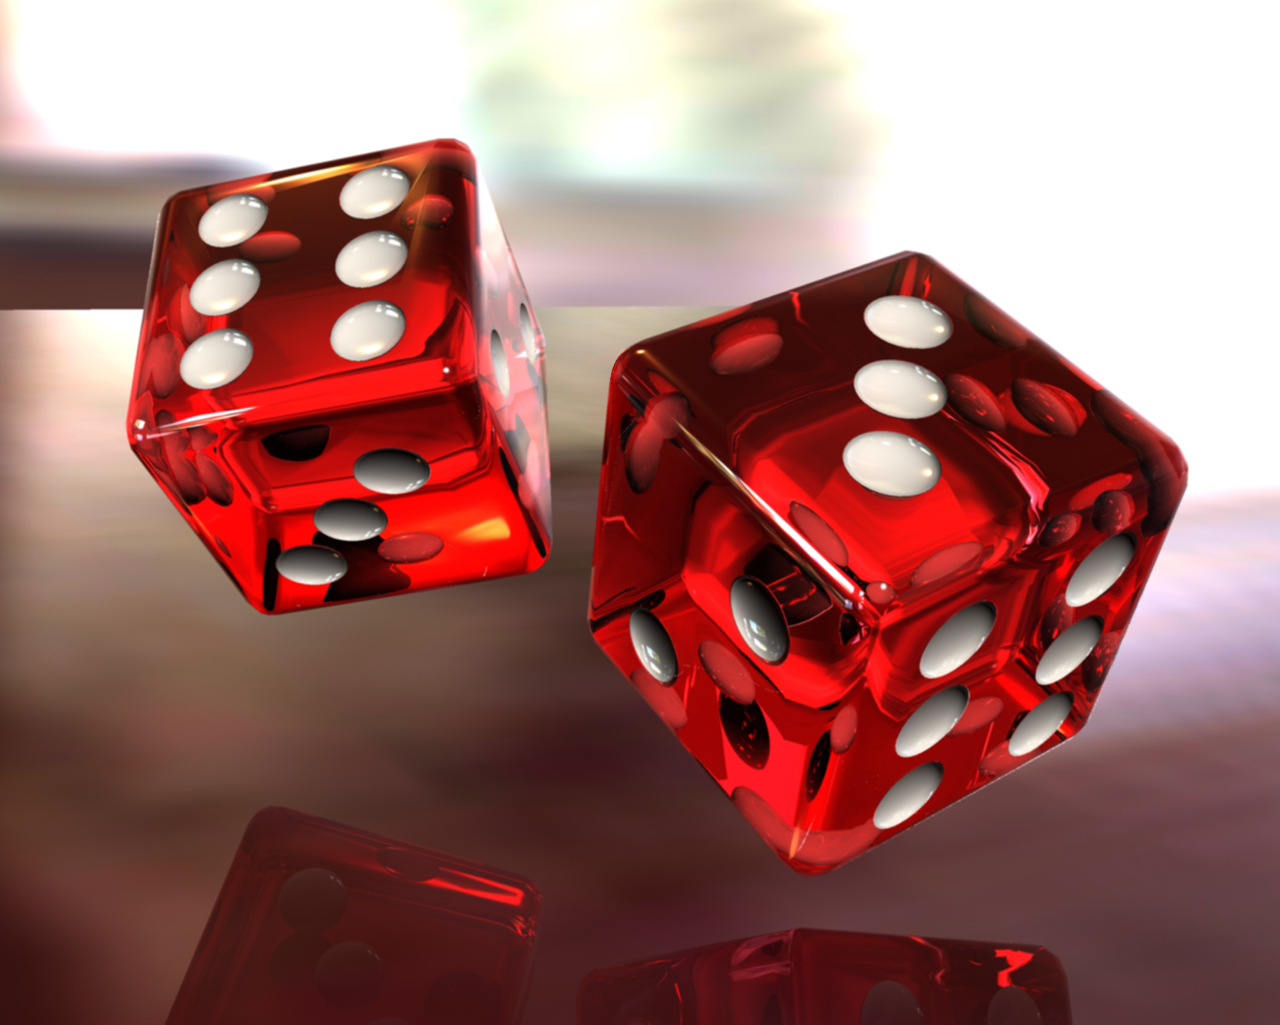 Awesome Red Dice HD Wallpaper Photo Picture Free Download